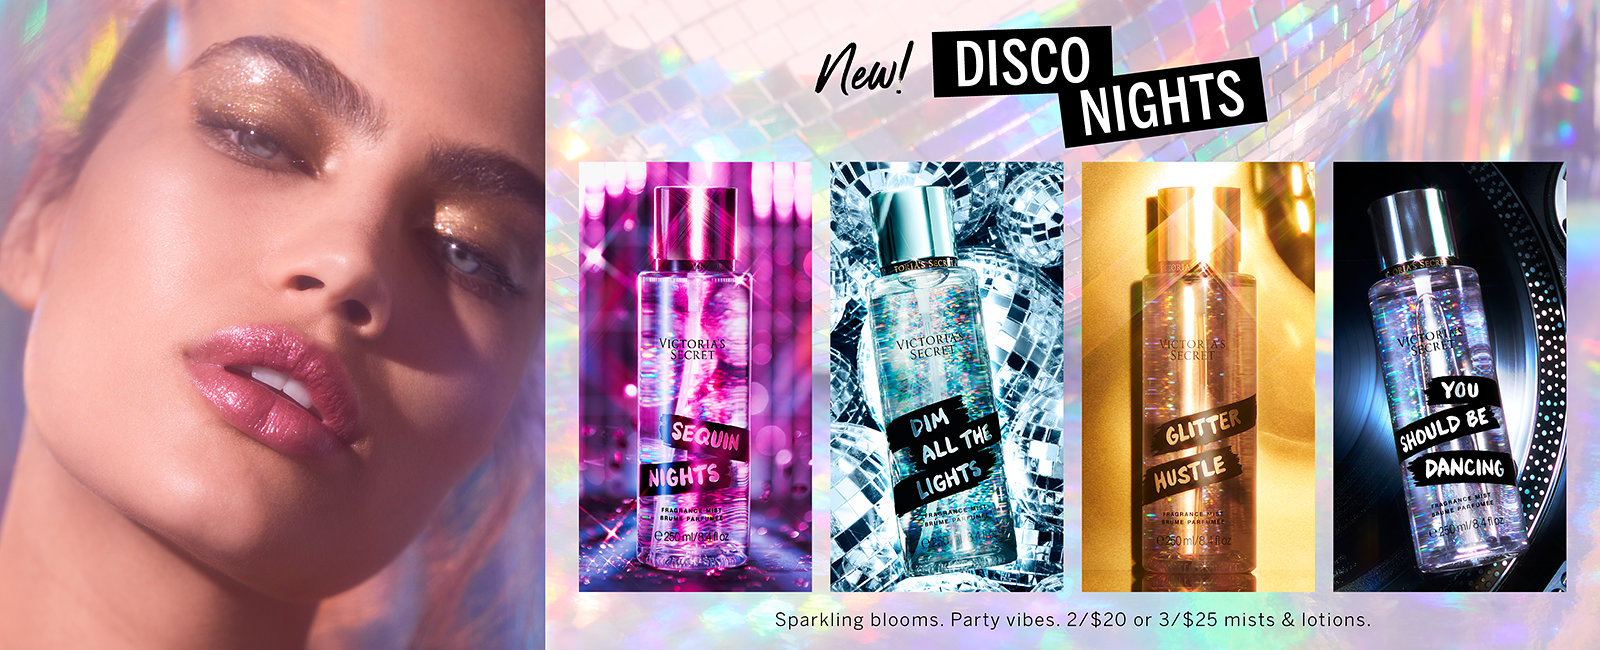 Sequin Nights Victorias Secret Perfume A Fragrance For Women 2018 